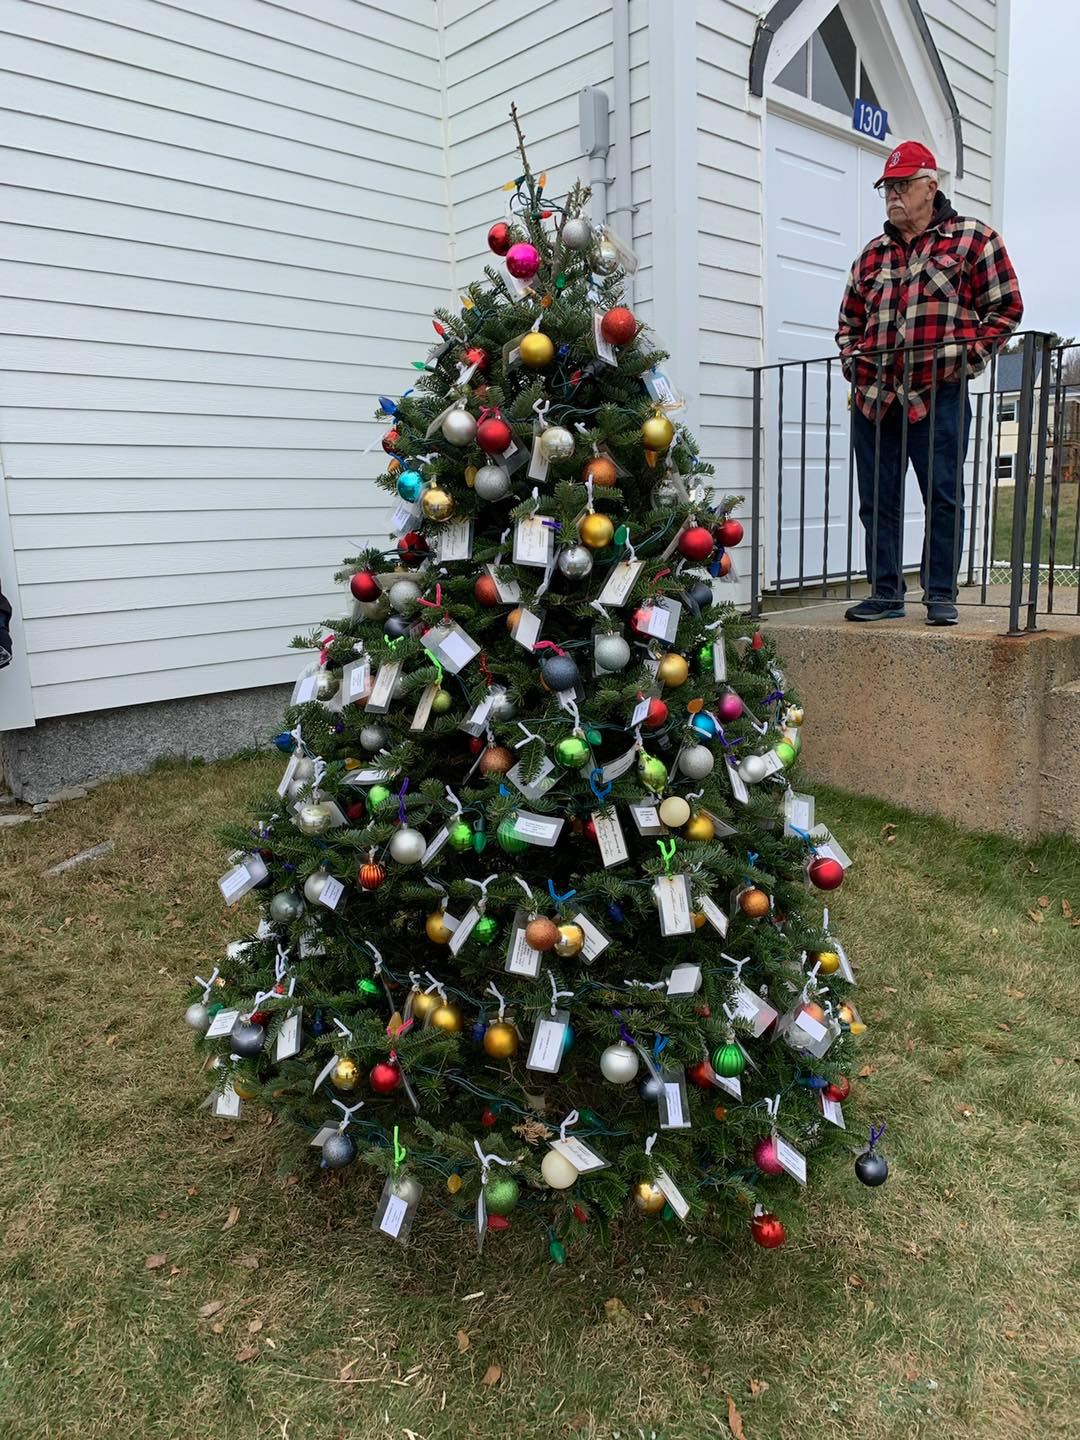 On Friday, Nov. 25th, St. Mark's Memory Tree was decorated in preparation for the Memory Tree Service on Sunday.